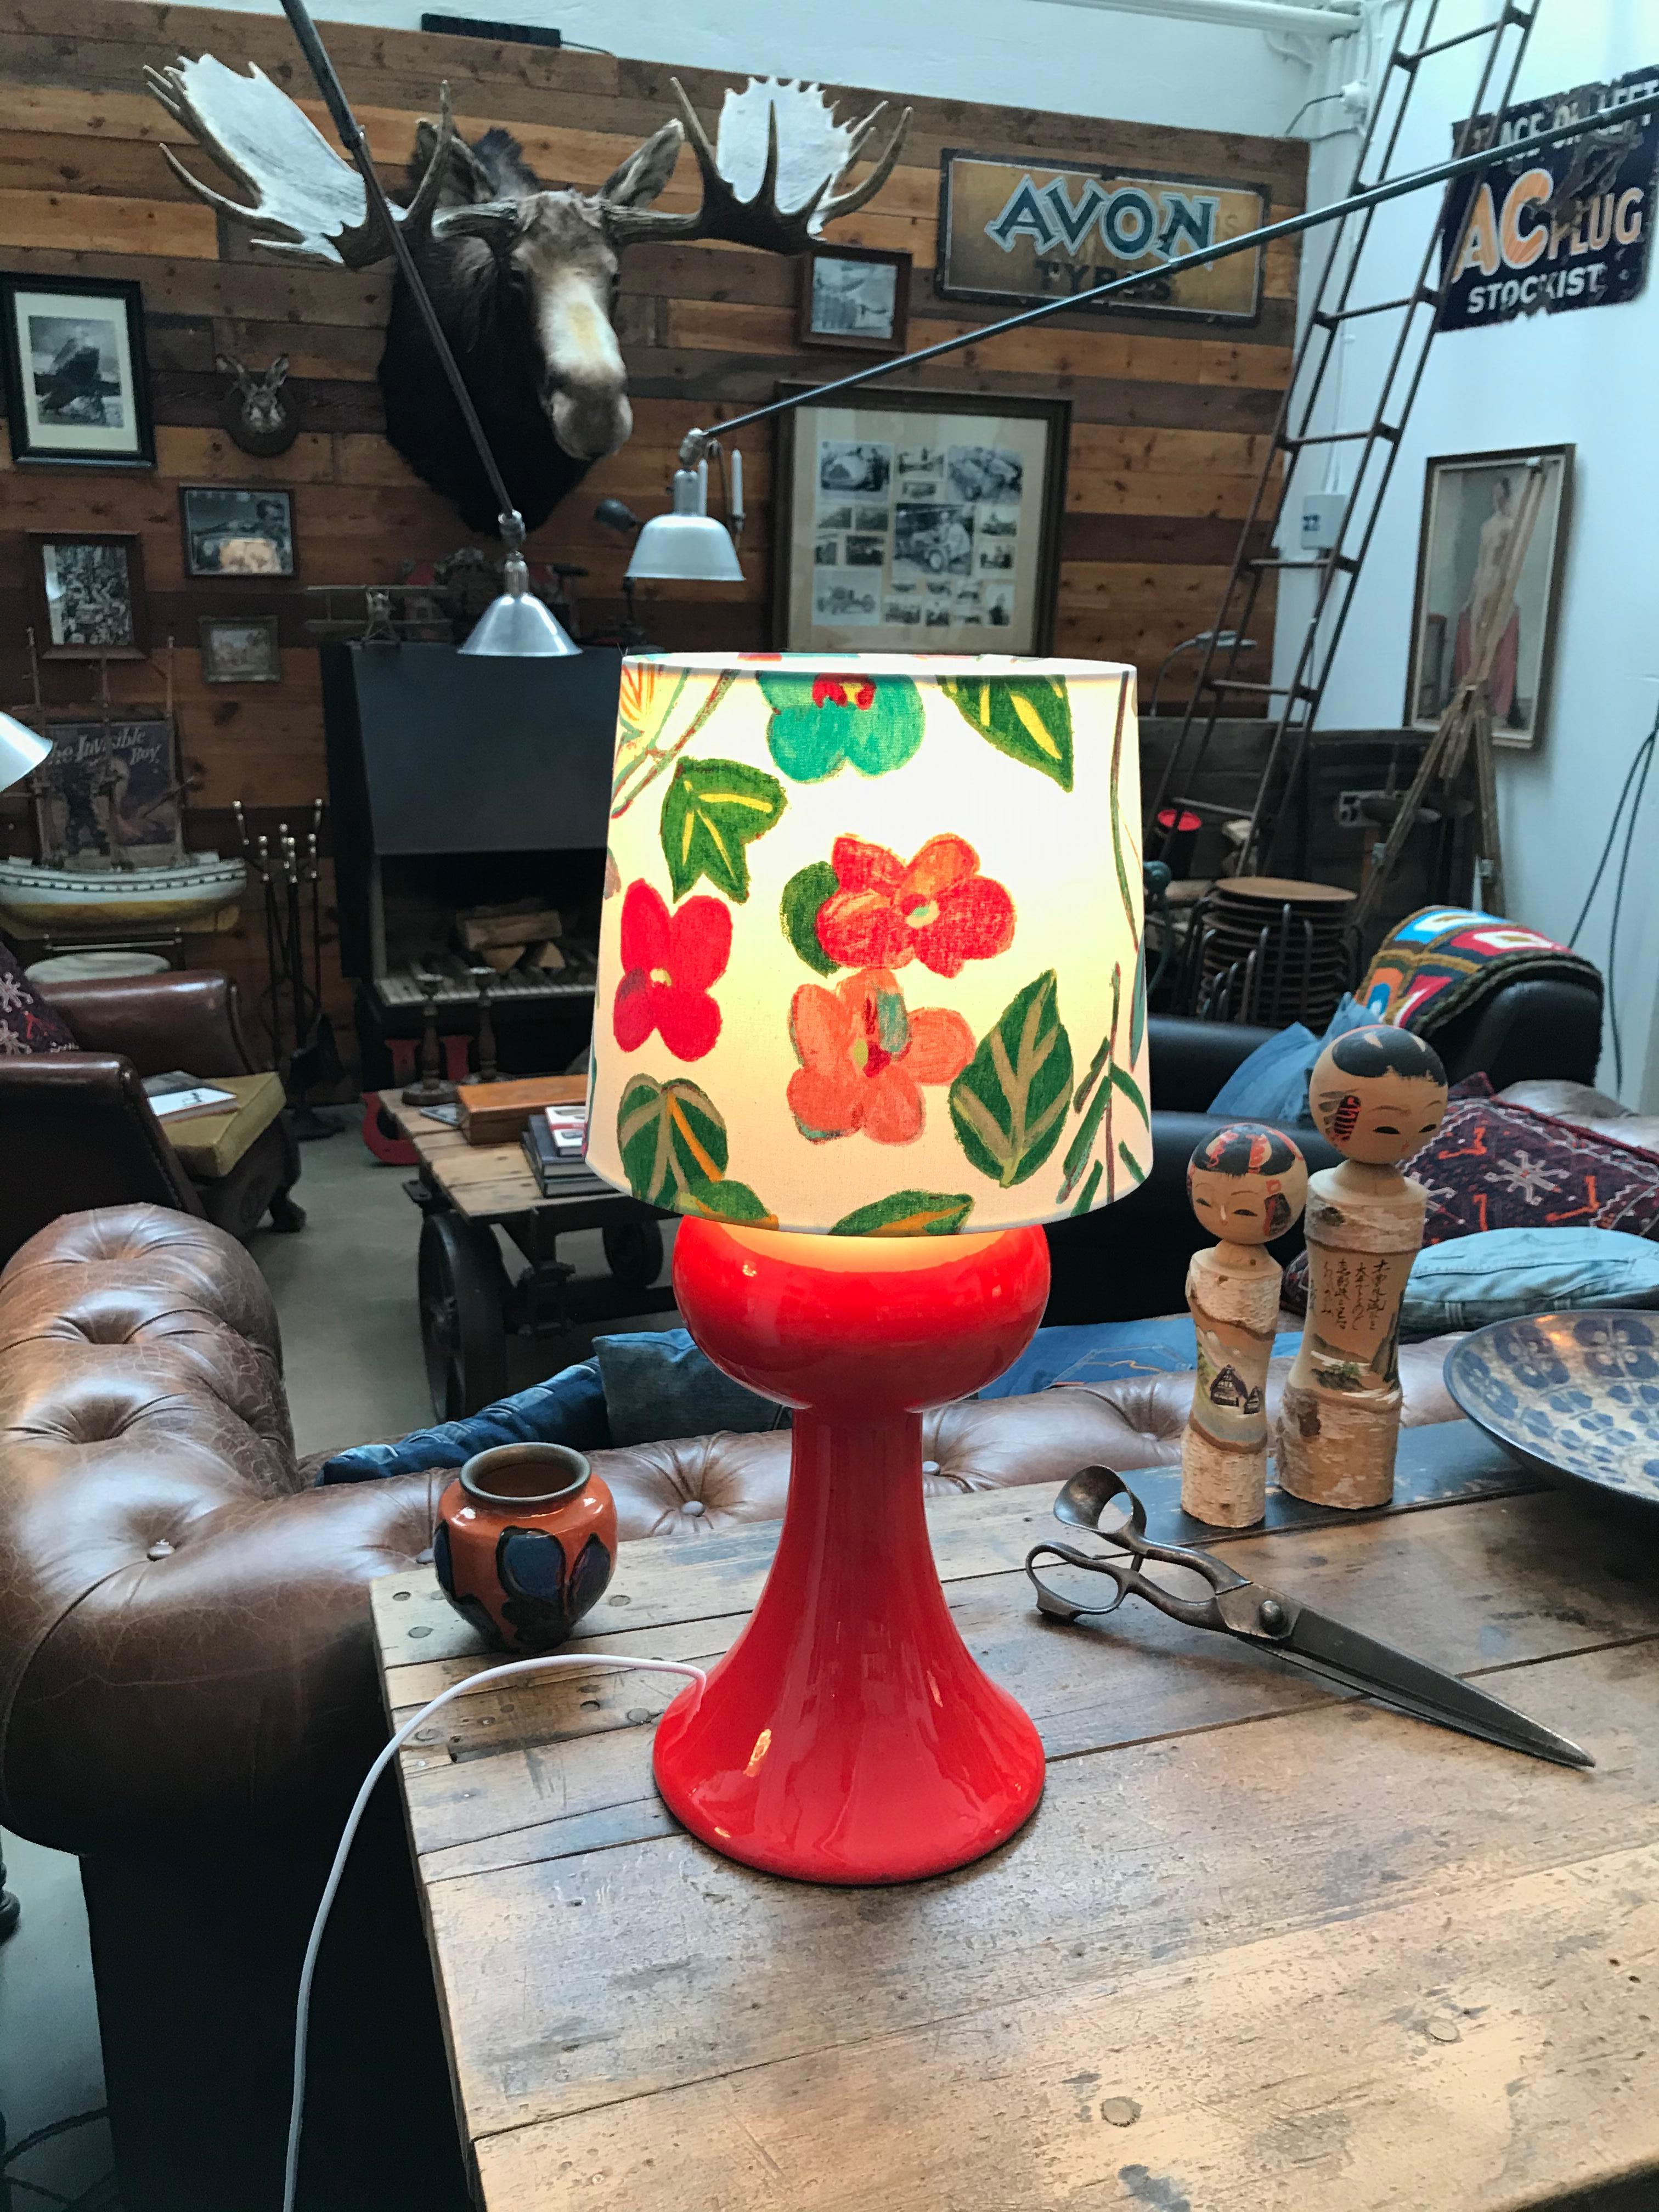 Vintage porcelain table lamp from the 1960s
This retro table lamp has great proportions and a striking red glaze to the surface.
Beautiful handmade lampshade from ArtbyMaj.
Rewired and ready to use.
Can be fitted with an EU or US plug.
A beautiful